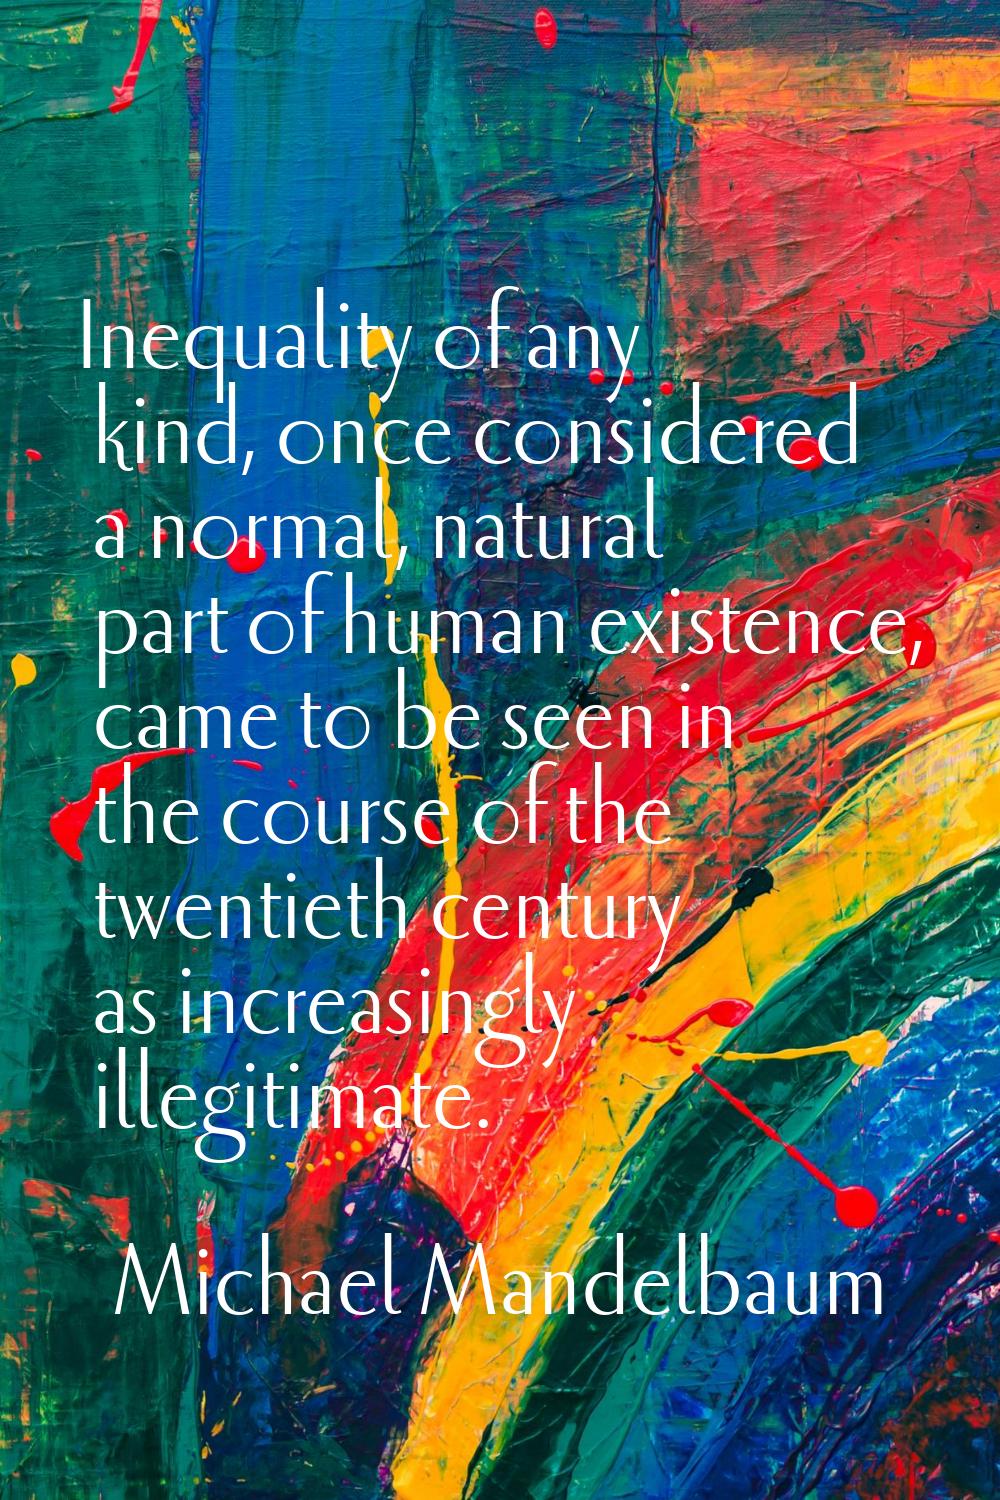 Inequality of any kind, once considered a normal, natural part of human existence, came to be seen 